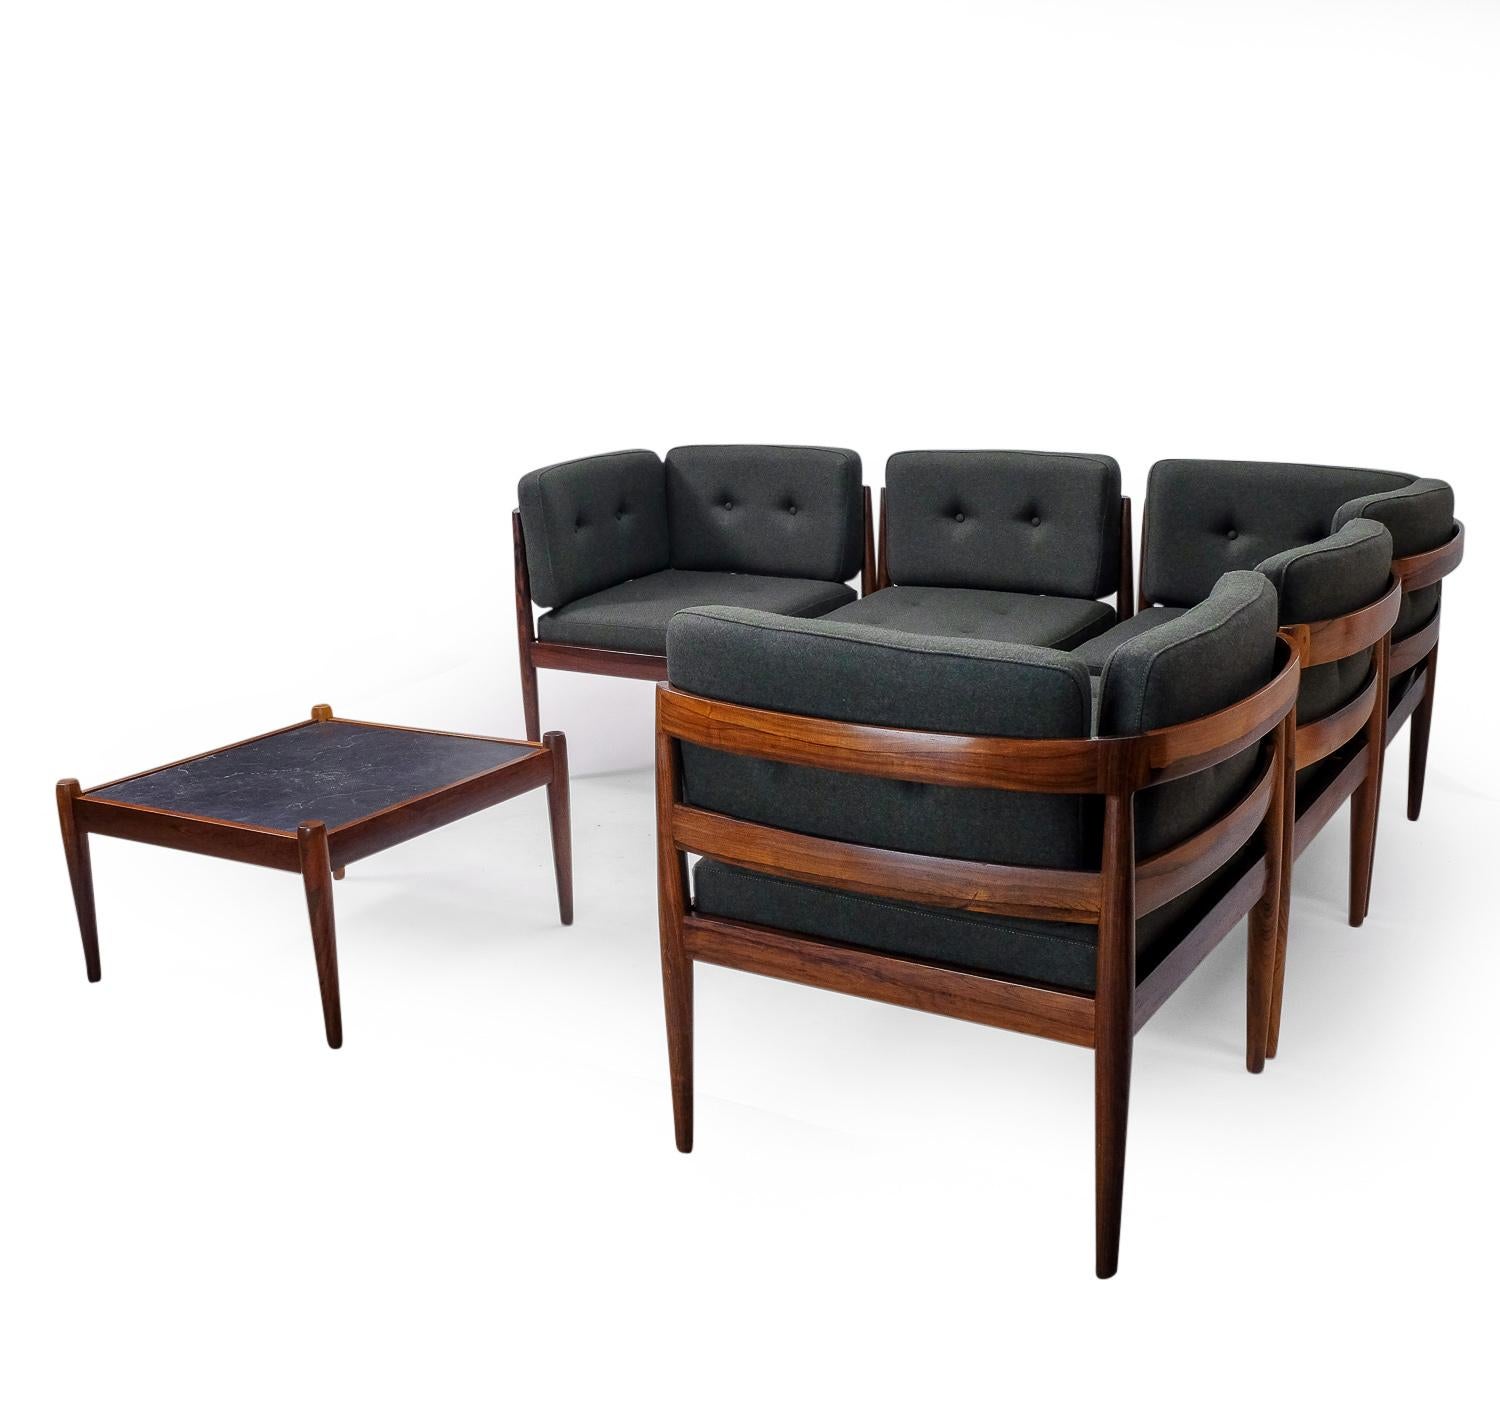 A rare seating arrangement designed by designer Kai Kristiansen for Magnus Olesen in Denmark.

This set has been made from Brazilian Rio Palisander and represents excellent craftsmanship as can be expected from Kai Kristiansen. The seats and table